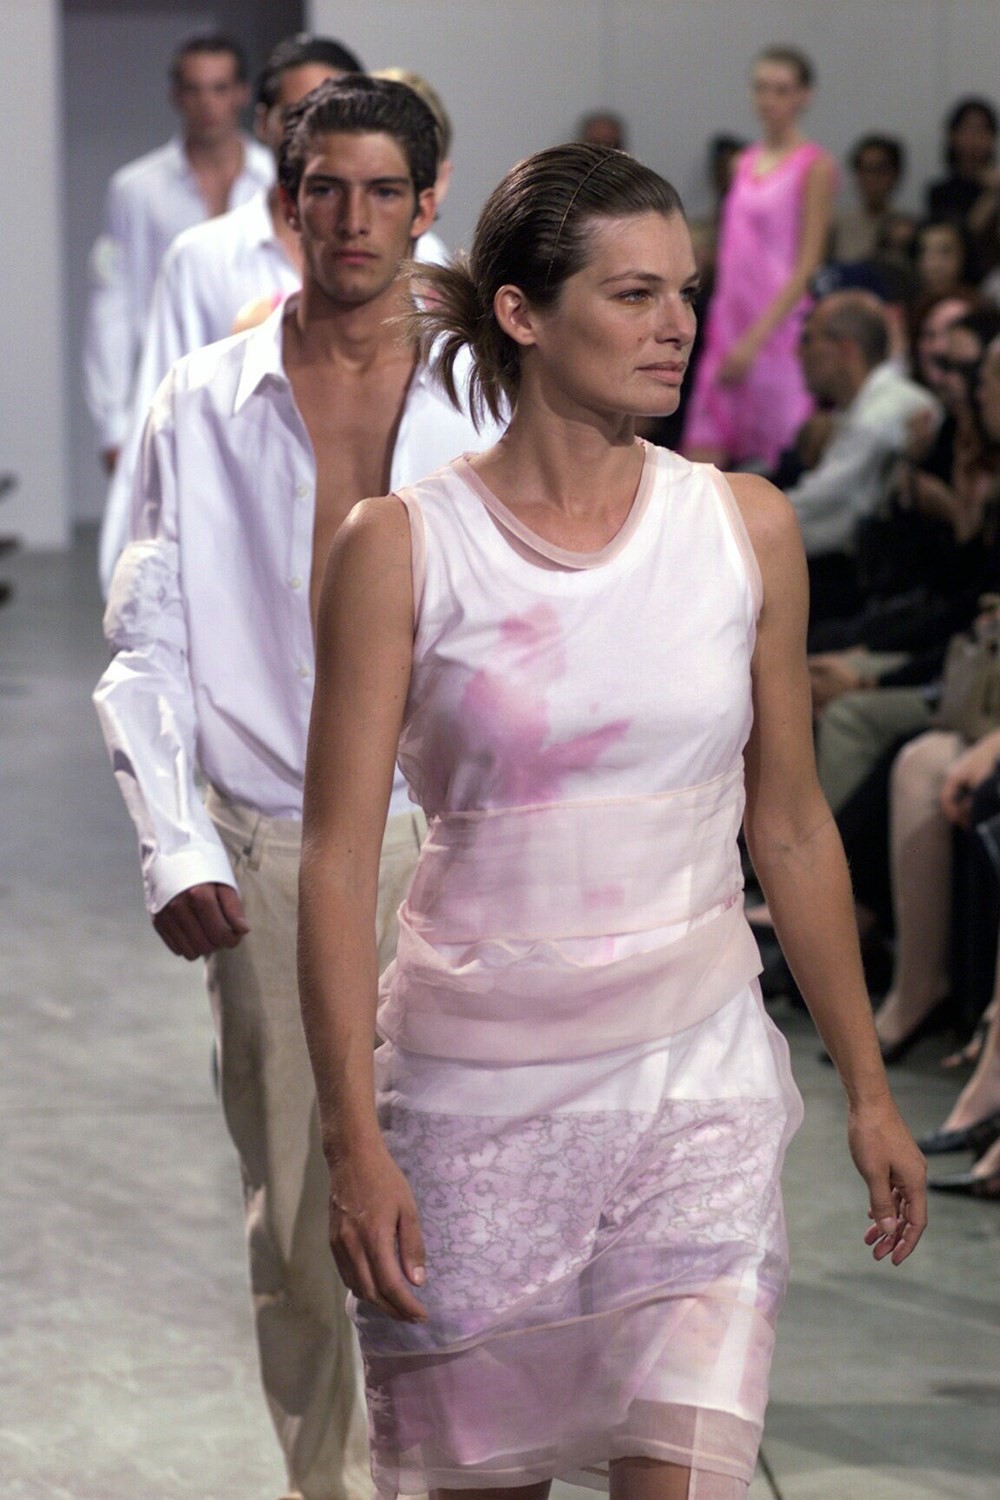 Capturing the Zeitgeist of Lo-Fi Luxe: Helmut Lang S/S99 | AnOther